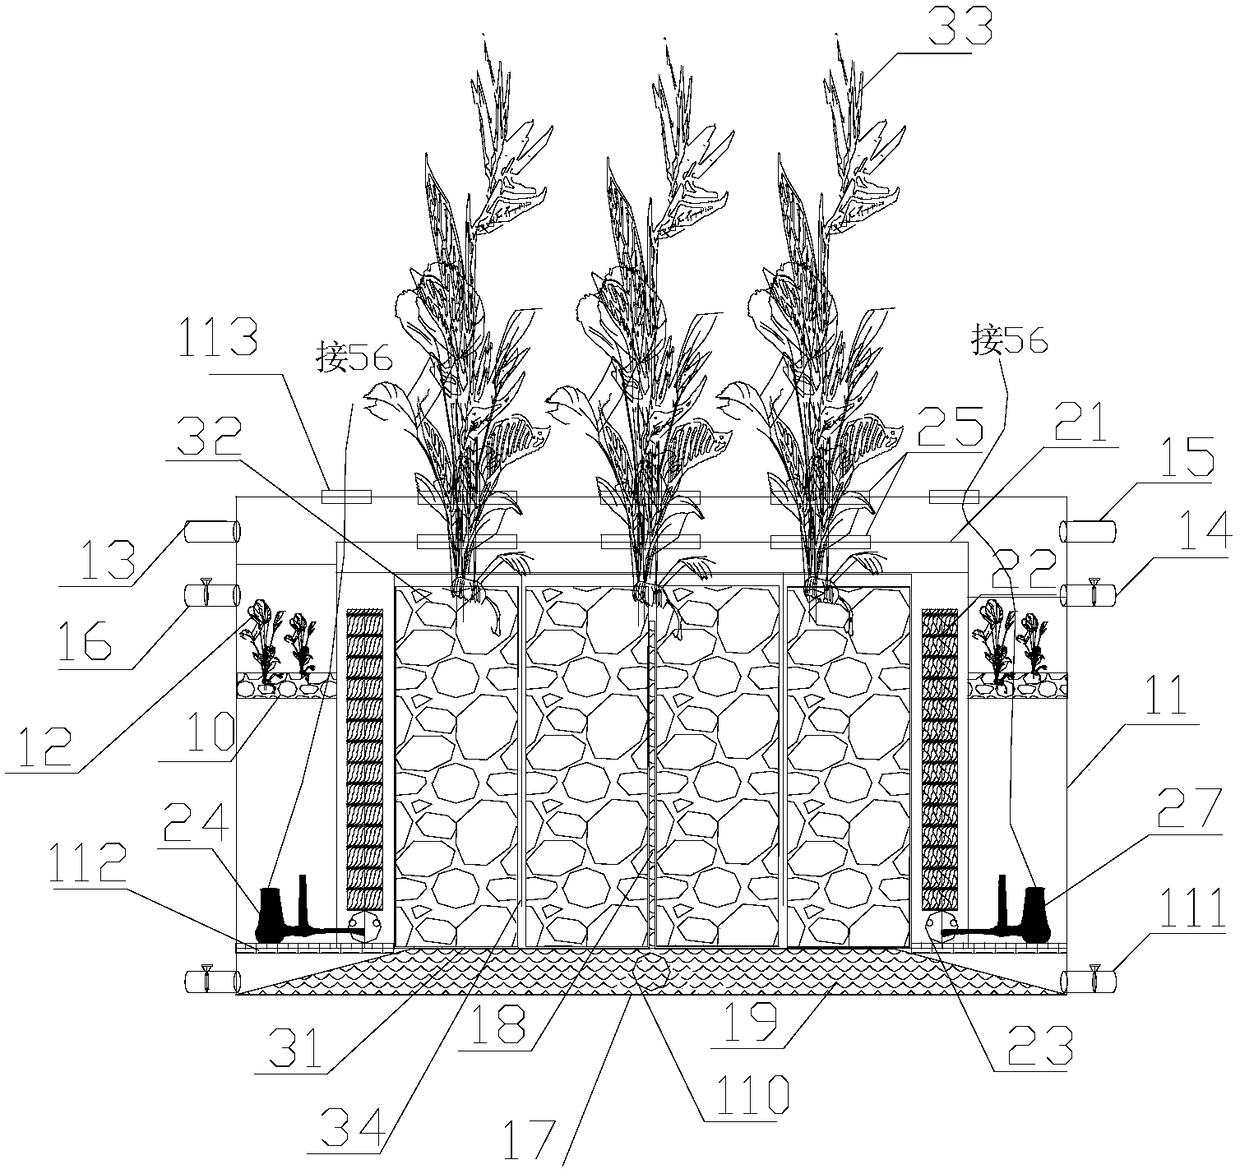 Intelligent-control type antiblockage artificial wetland rain and sewage enhanced disposal system and method based on solar power